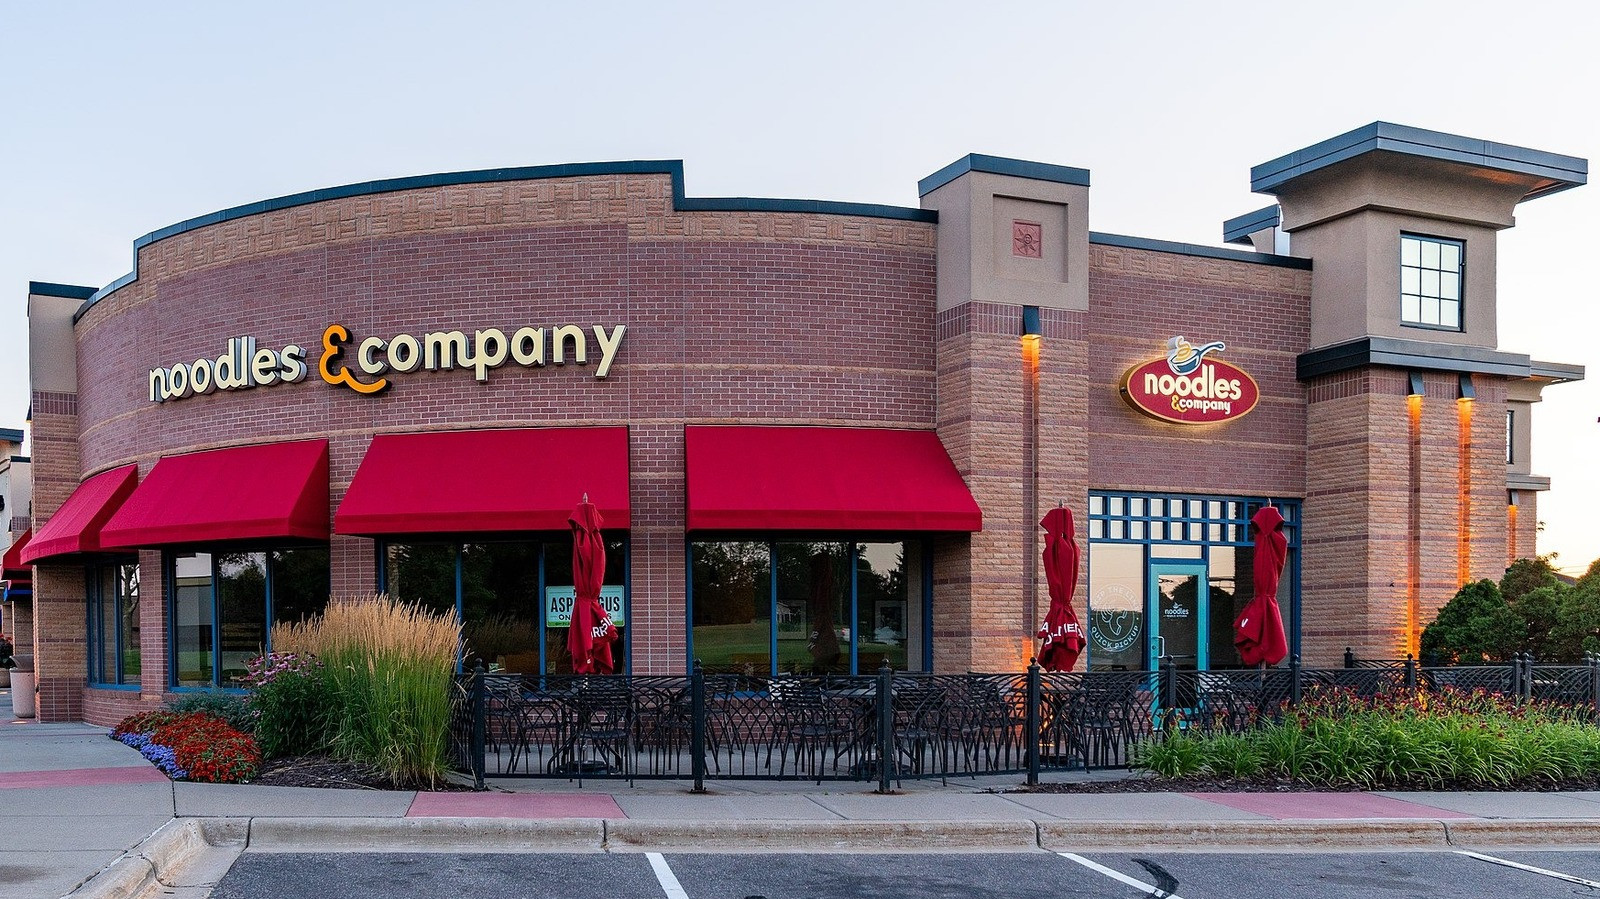 Noodles and Company Pay Unique How Rich is the Noodles and Pany Ceo and What S the